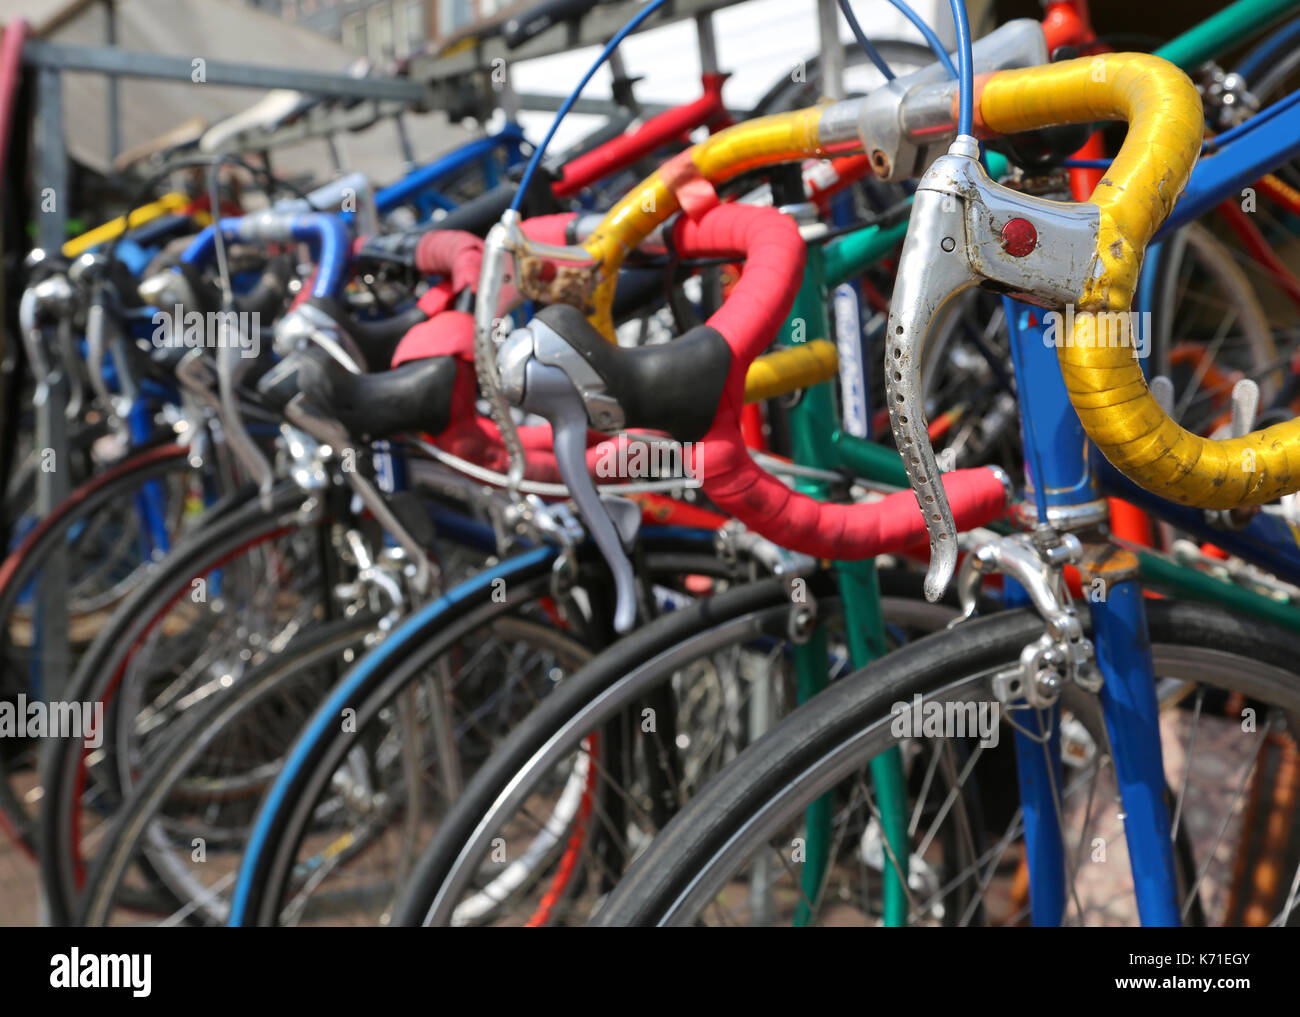 many vintage racing bikes for sale in the flea market alfresco in a city Stock Photo